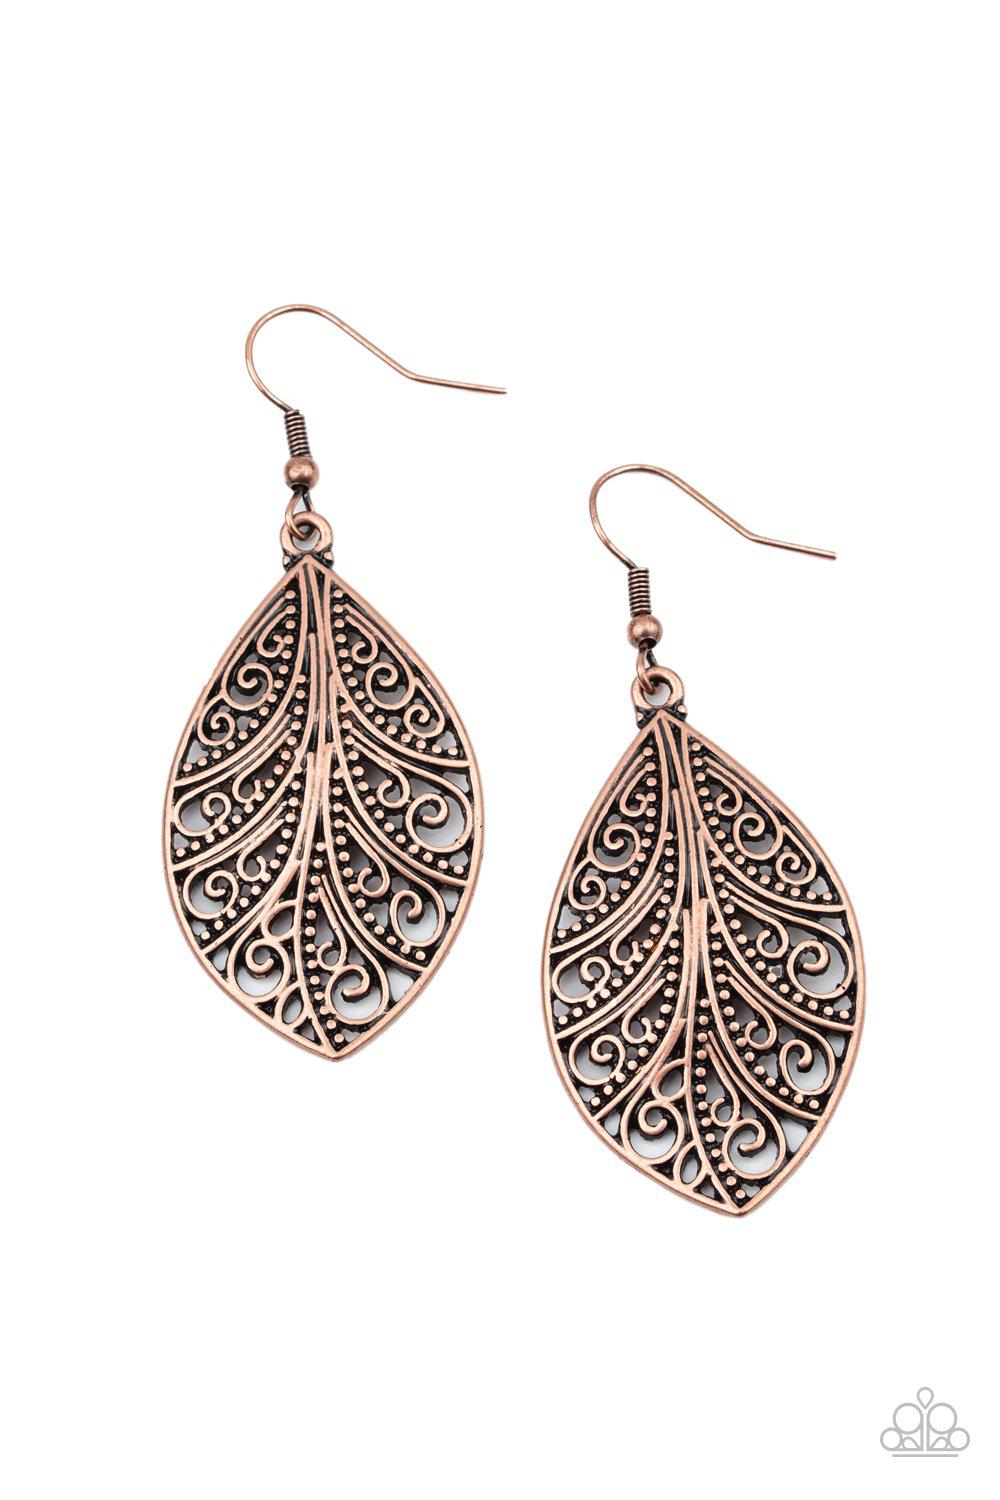 One VINE Day Copper Filigree Earrings - Paparazzi Accessories - lightbox -CarasShop.com - $5 Jewelry by Cara Jewels